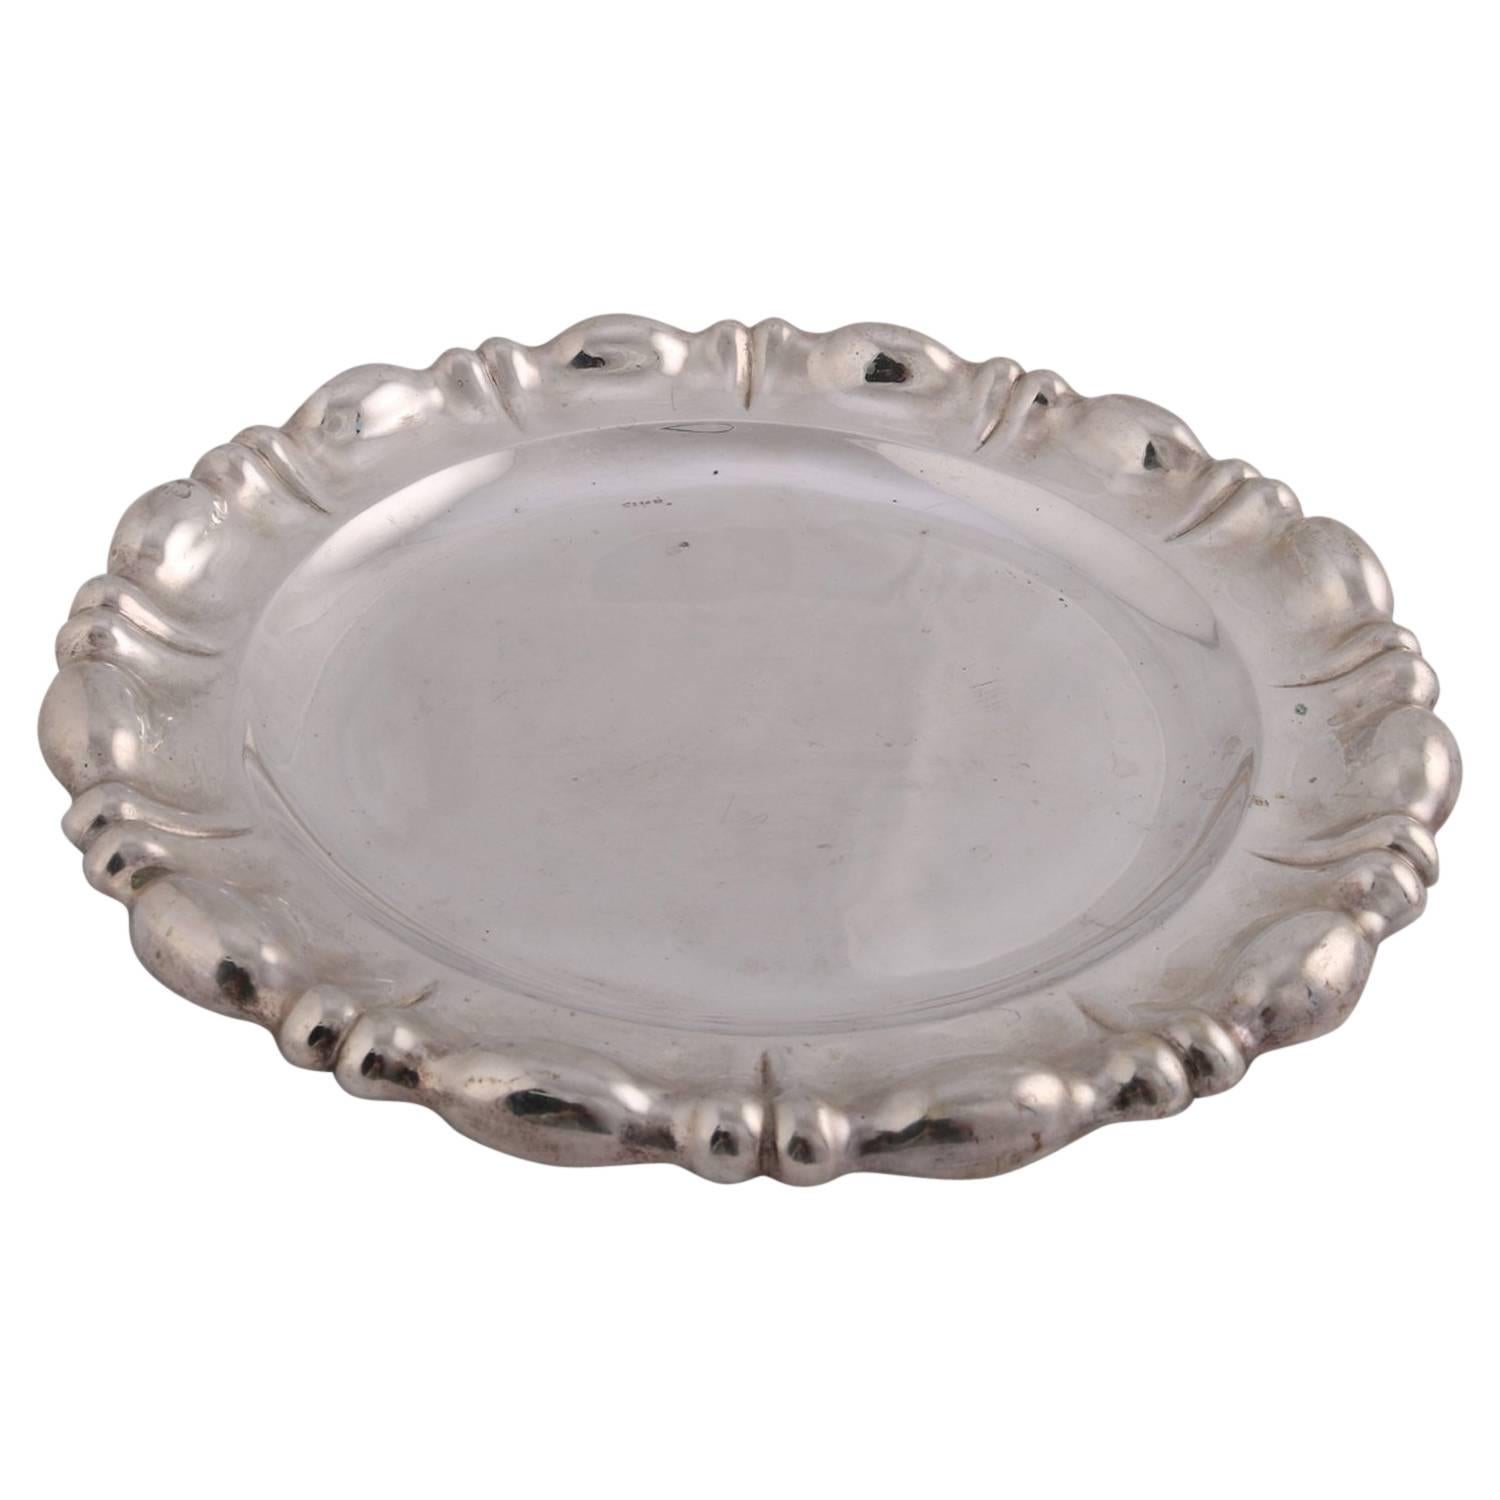 German .840 Silver Hand-Hammered Repousse Platter, Augsburg, 19th Century